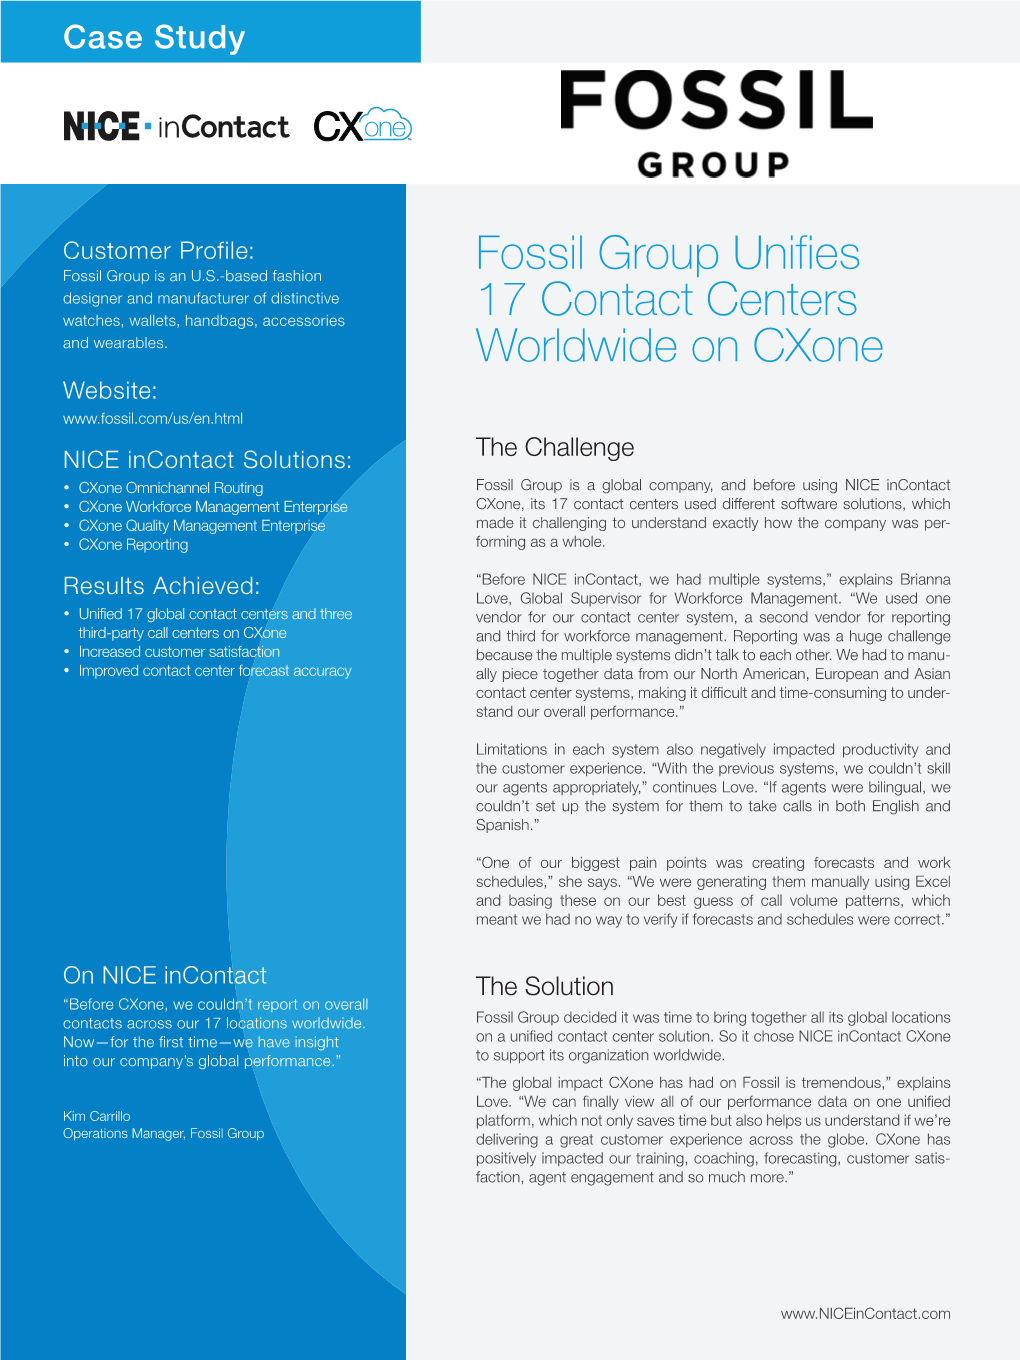 Fossil Group Unifies 17 Contact Centers Worldwide on Cxone